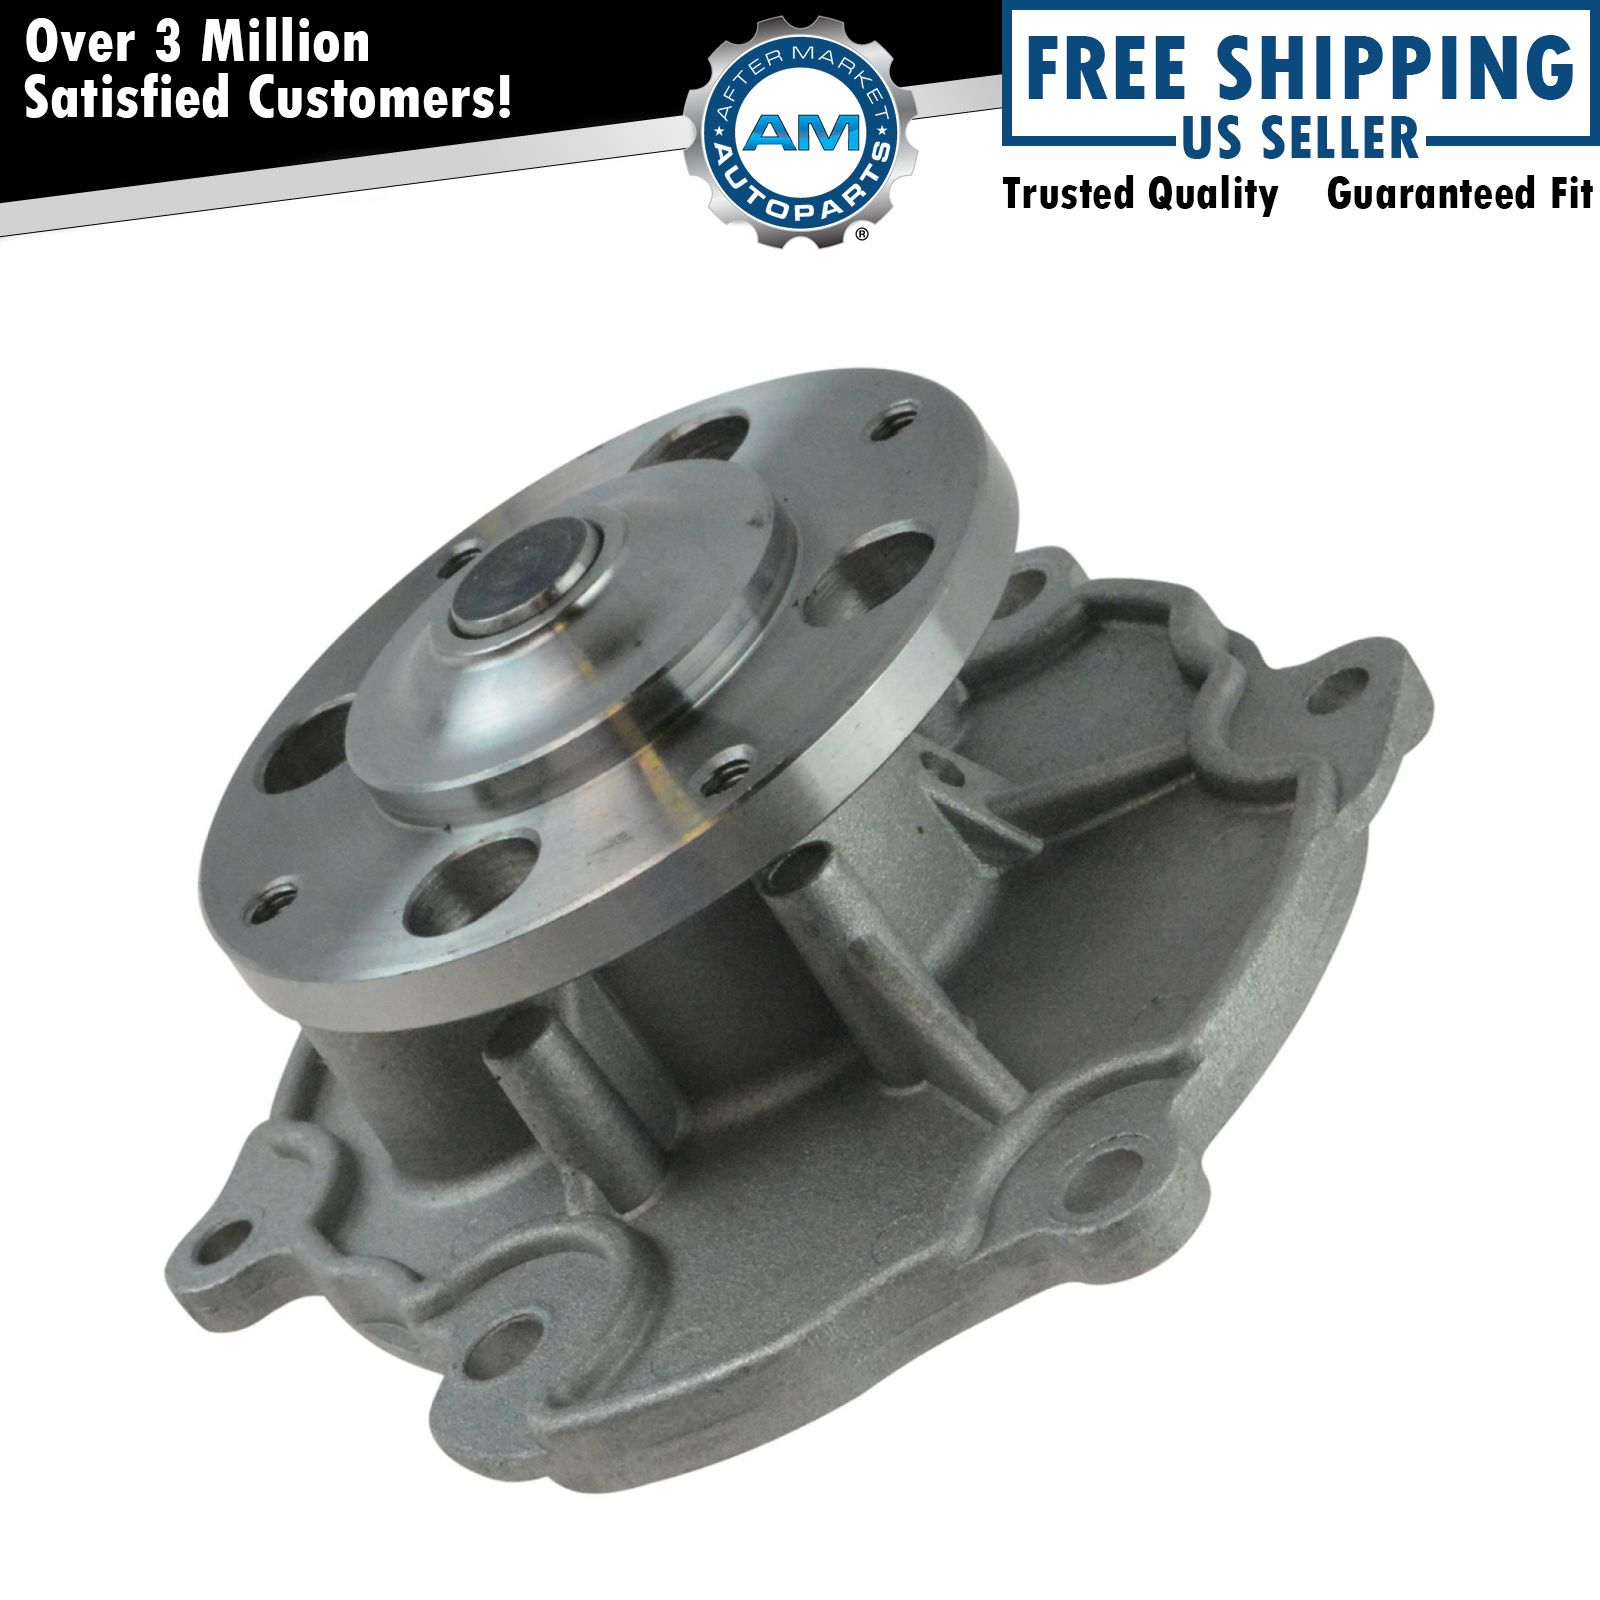 AC Delco Professional Series 252-889 Engine Water Pump for Buick Chevy GMC New